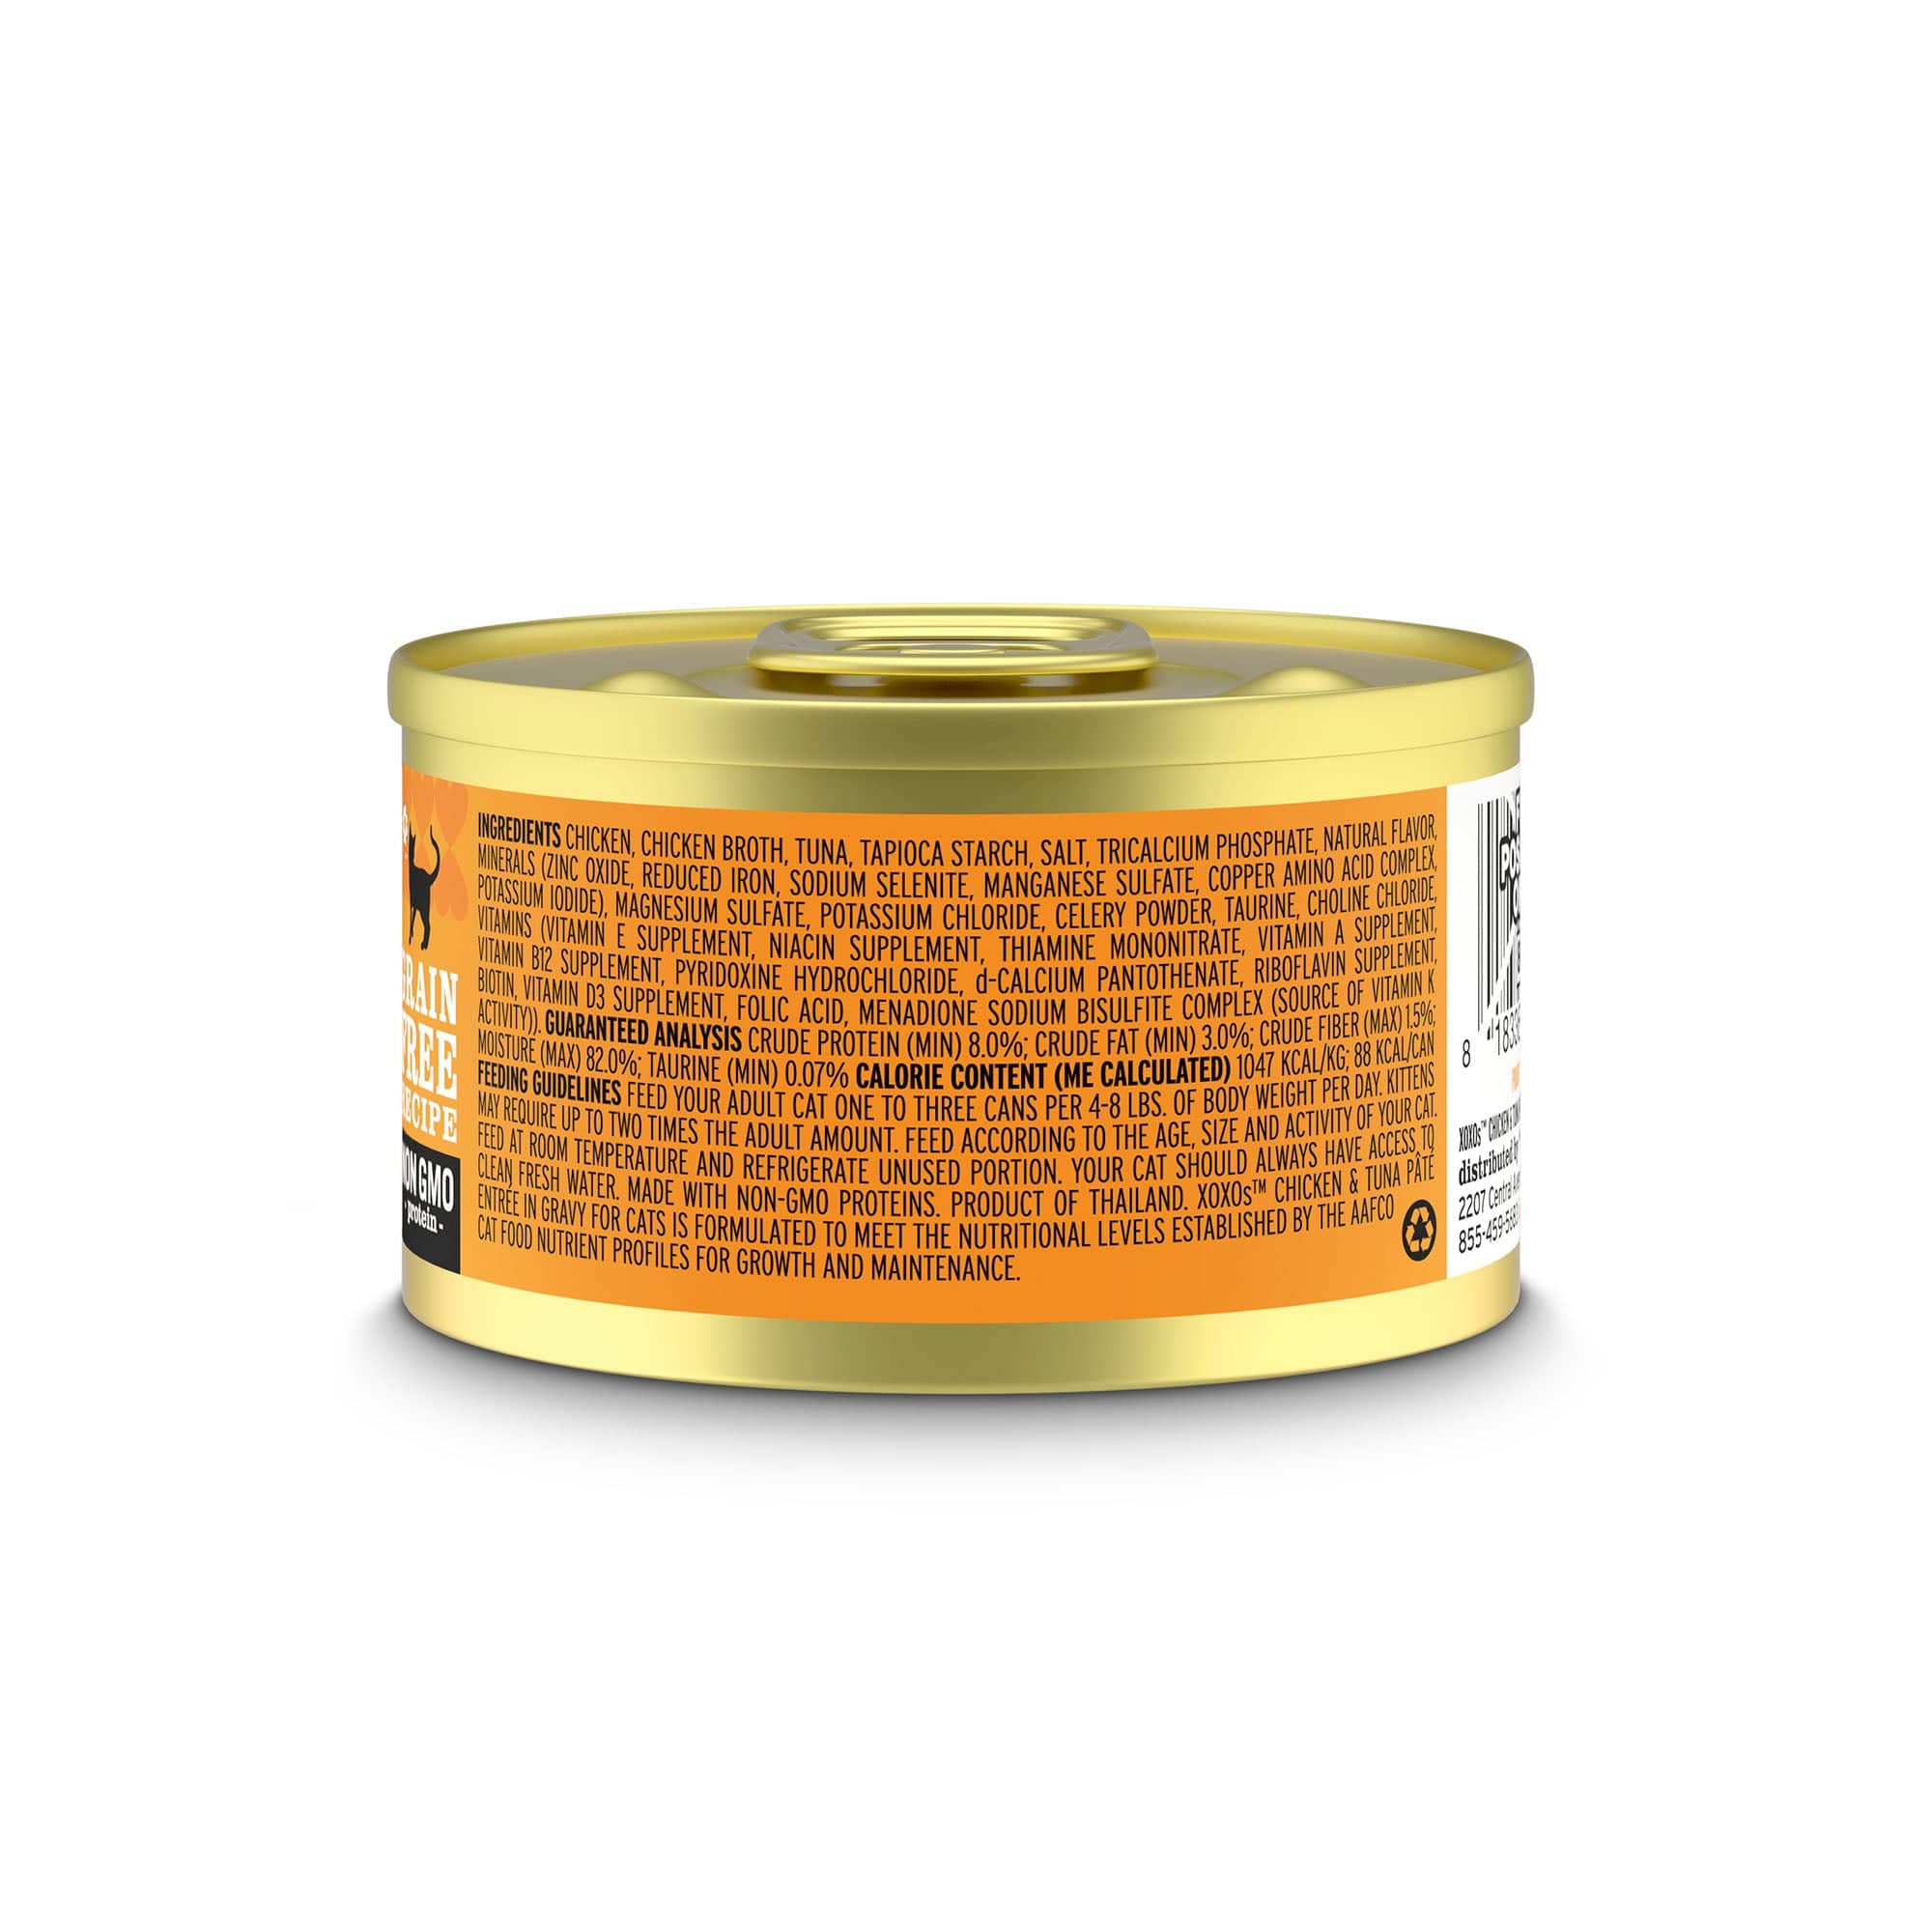 XOXOs Chicken & Tuna Pate can of food with label, close-up of gourmet canned pâté with chicken and tuna proteins.